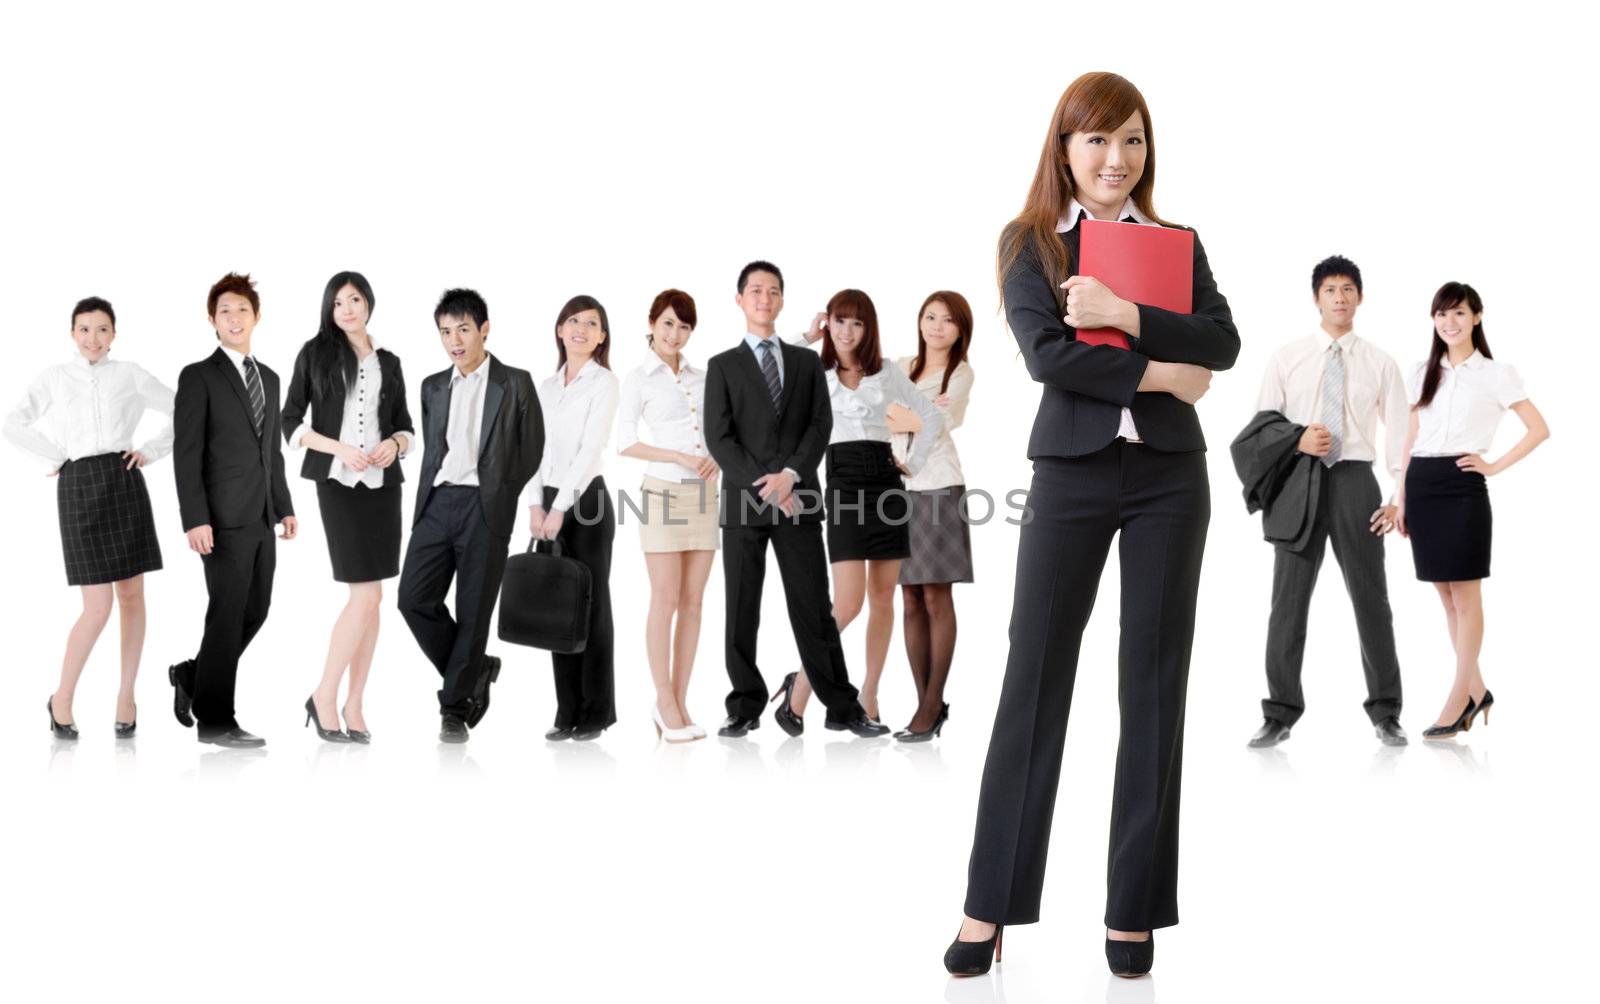 Confident business woman with her team on white background.